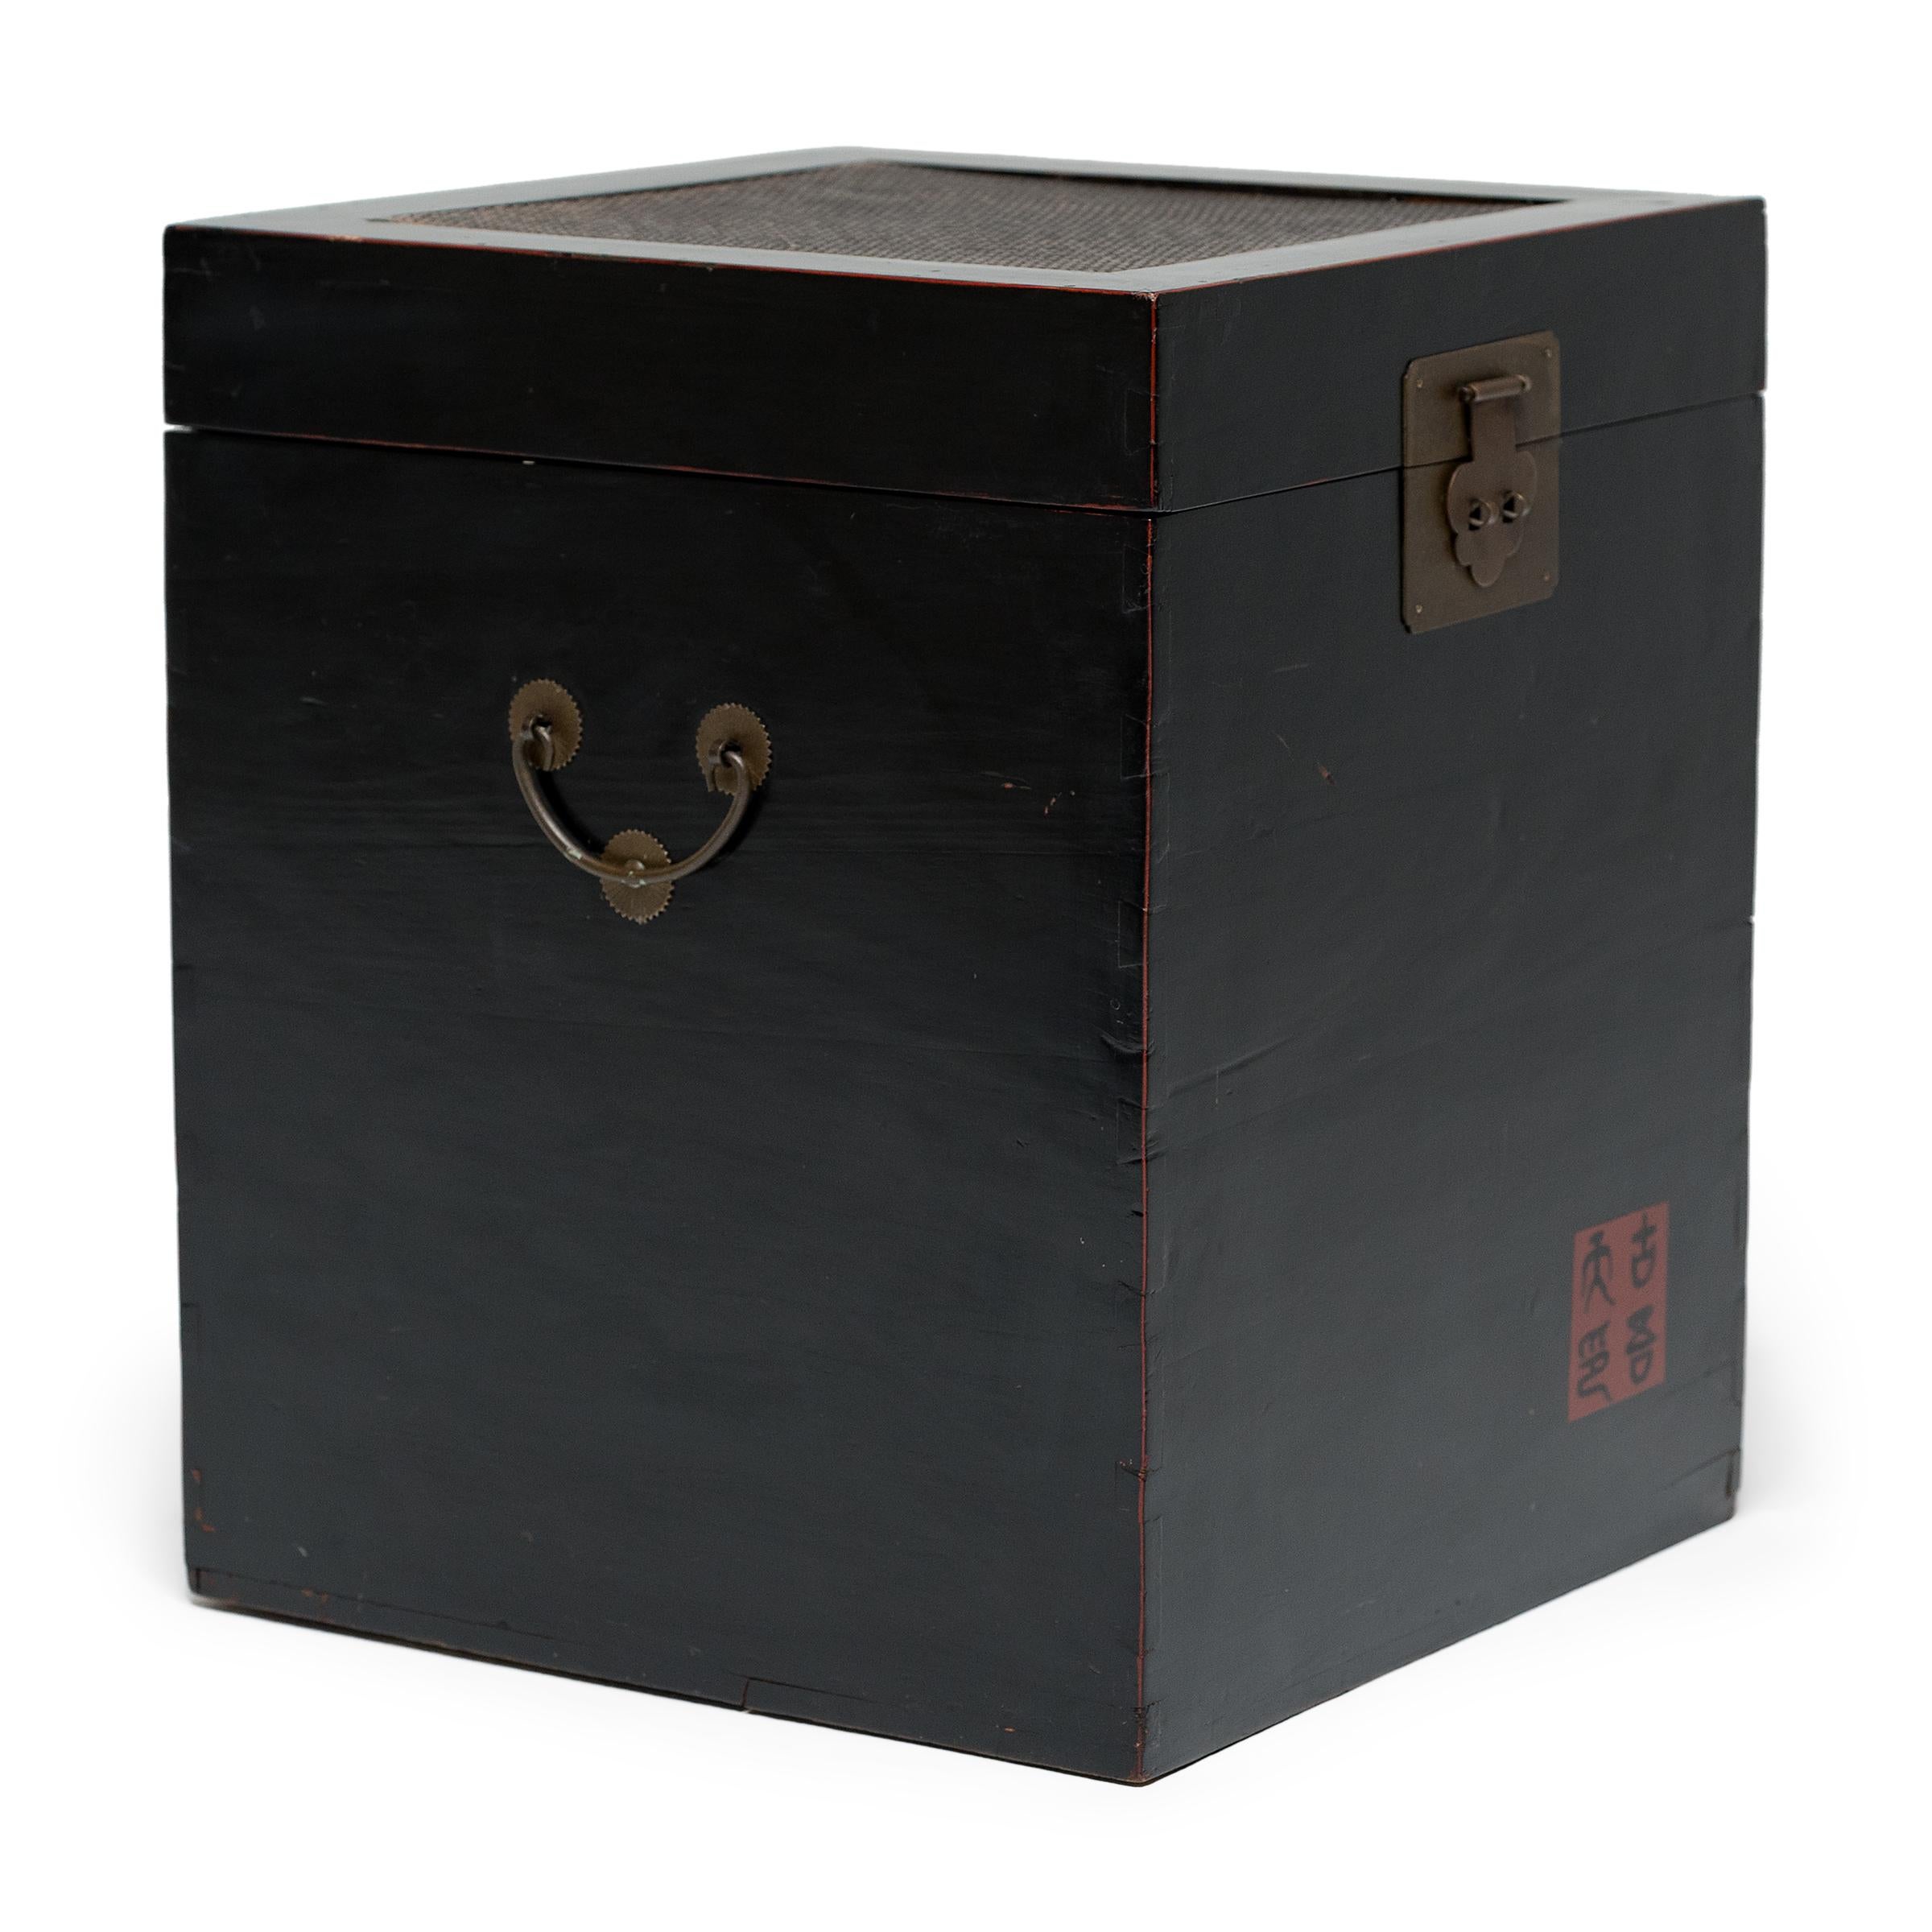 Crafted in the style of Chinese furniture, this petite storage chest is the perfect place to stow cords, toys, blankets, or anything you want stored beautifully. The square trunk features a glossy, black lacquer finish and a woven lidded top